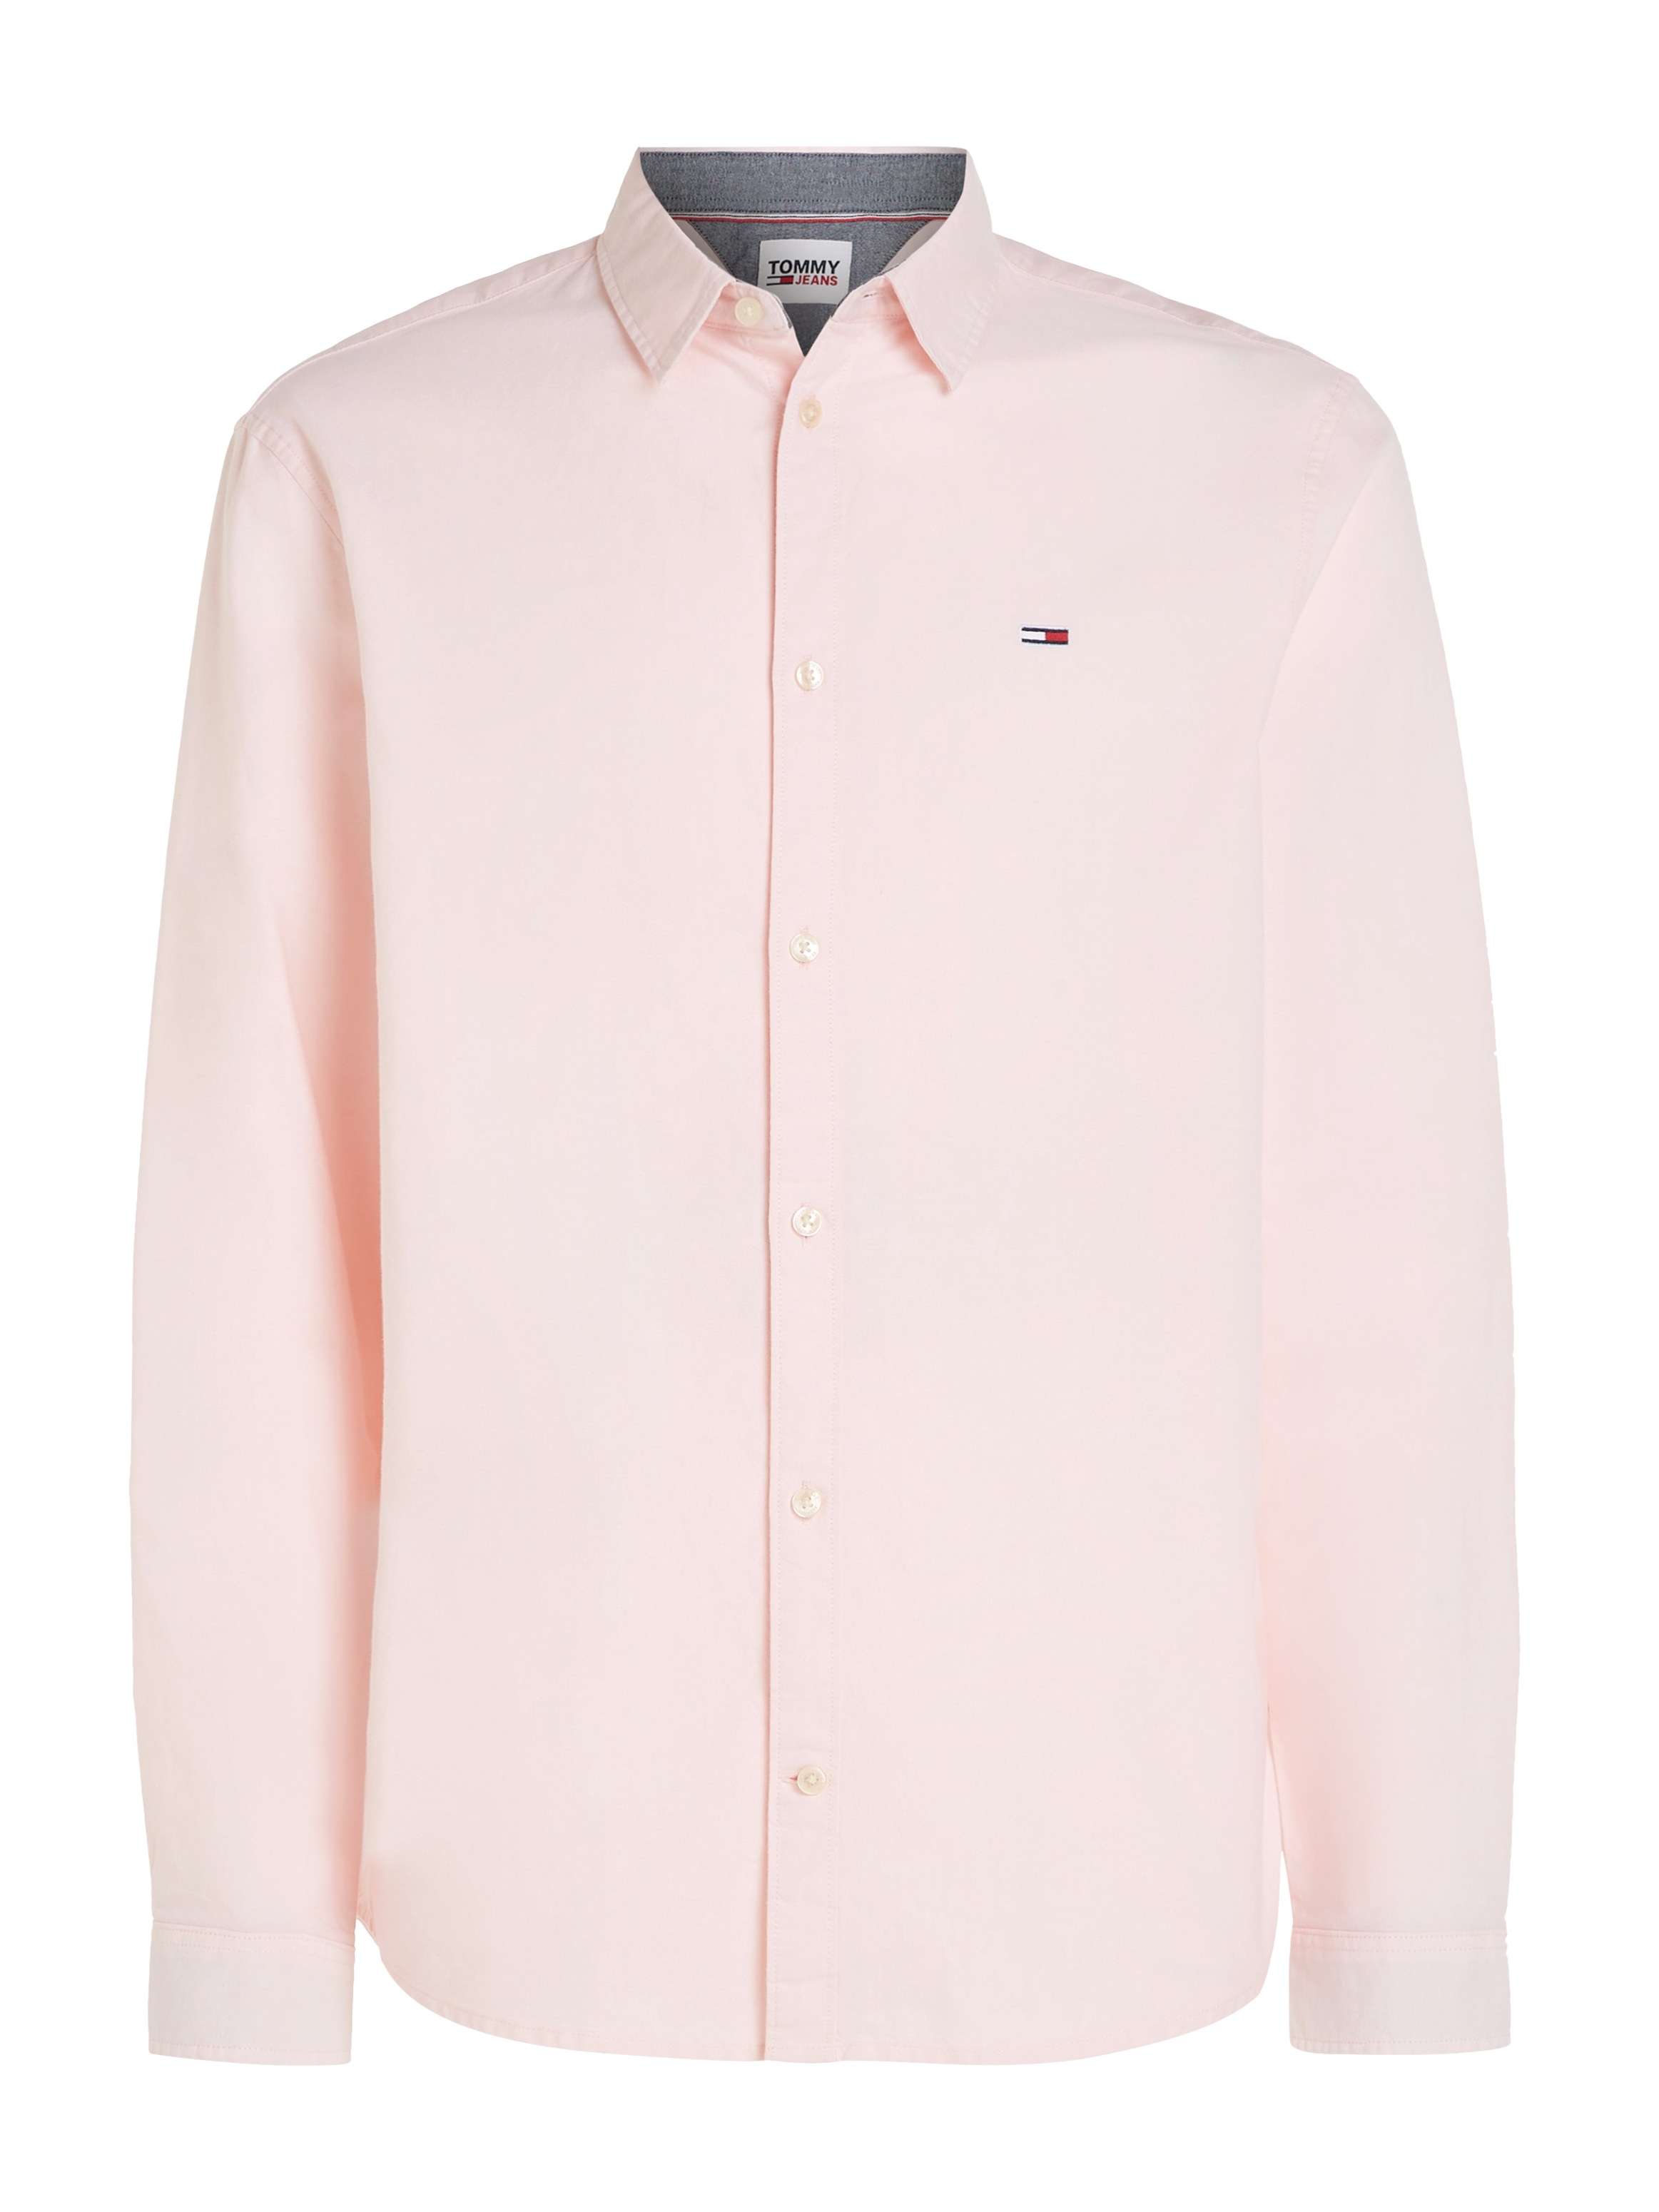 Tommy Jeans SHIRT« bei OXFORD CLASSIC shoppen OTTO Langarmhemd online »TJM